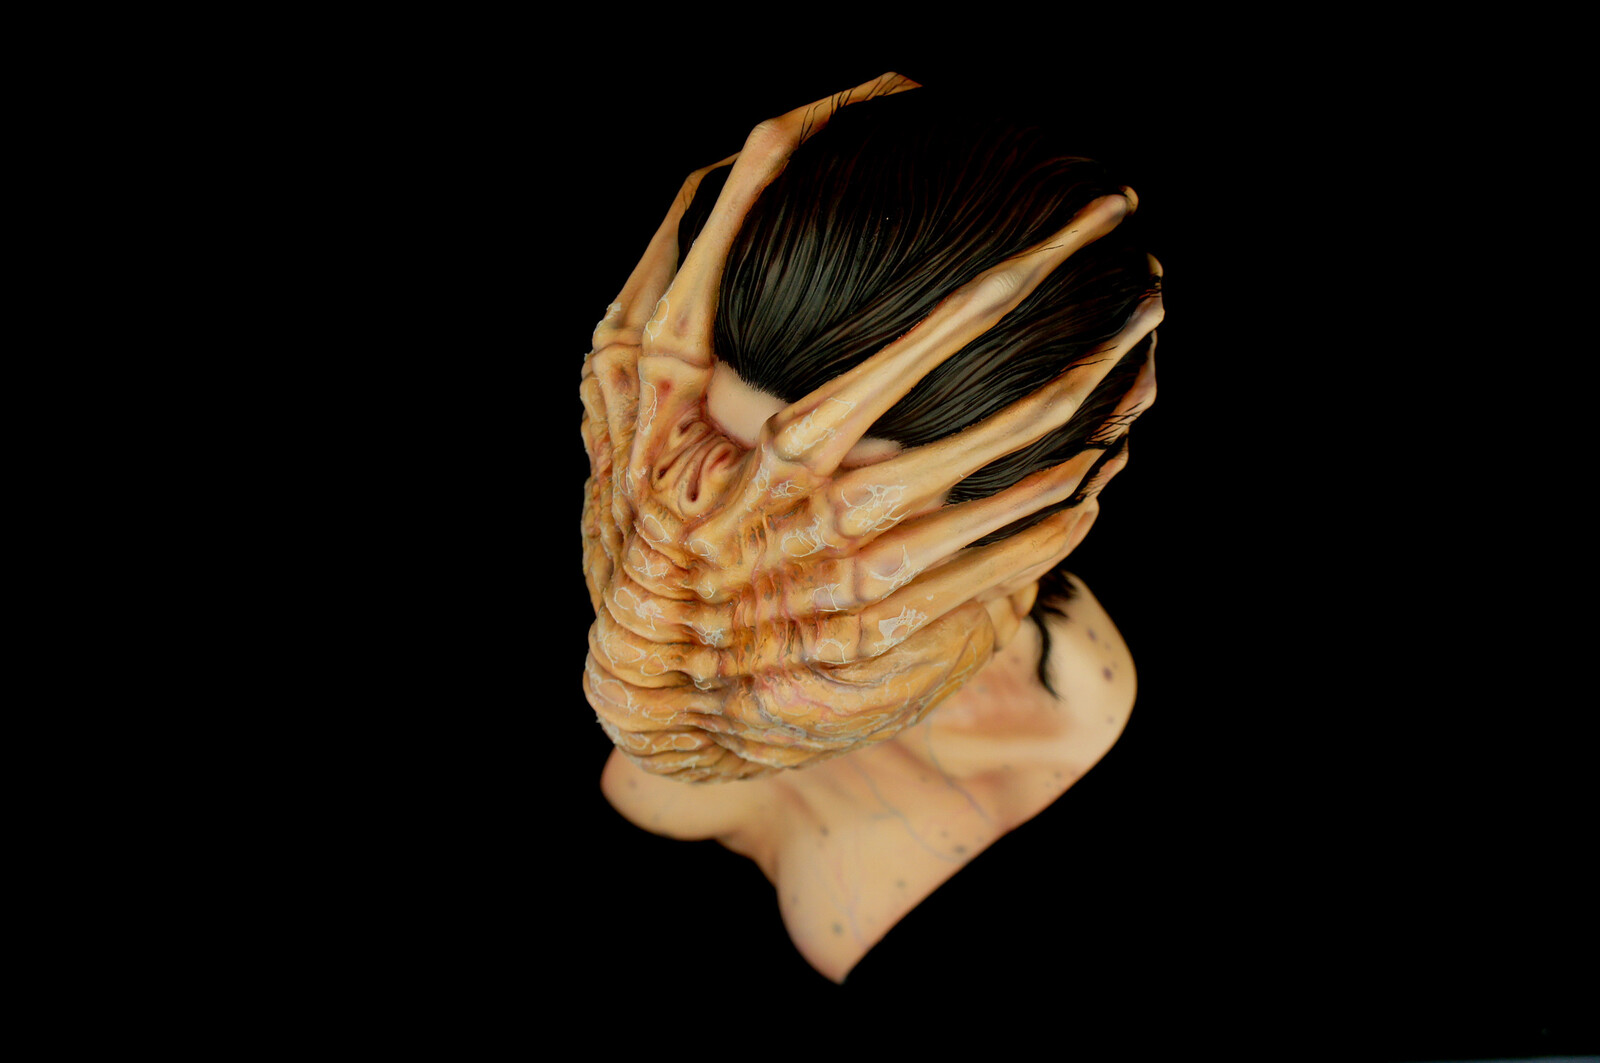 Alien Facehugger The Colonist 1:1 scale Bust Art Statue